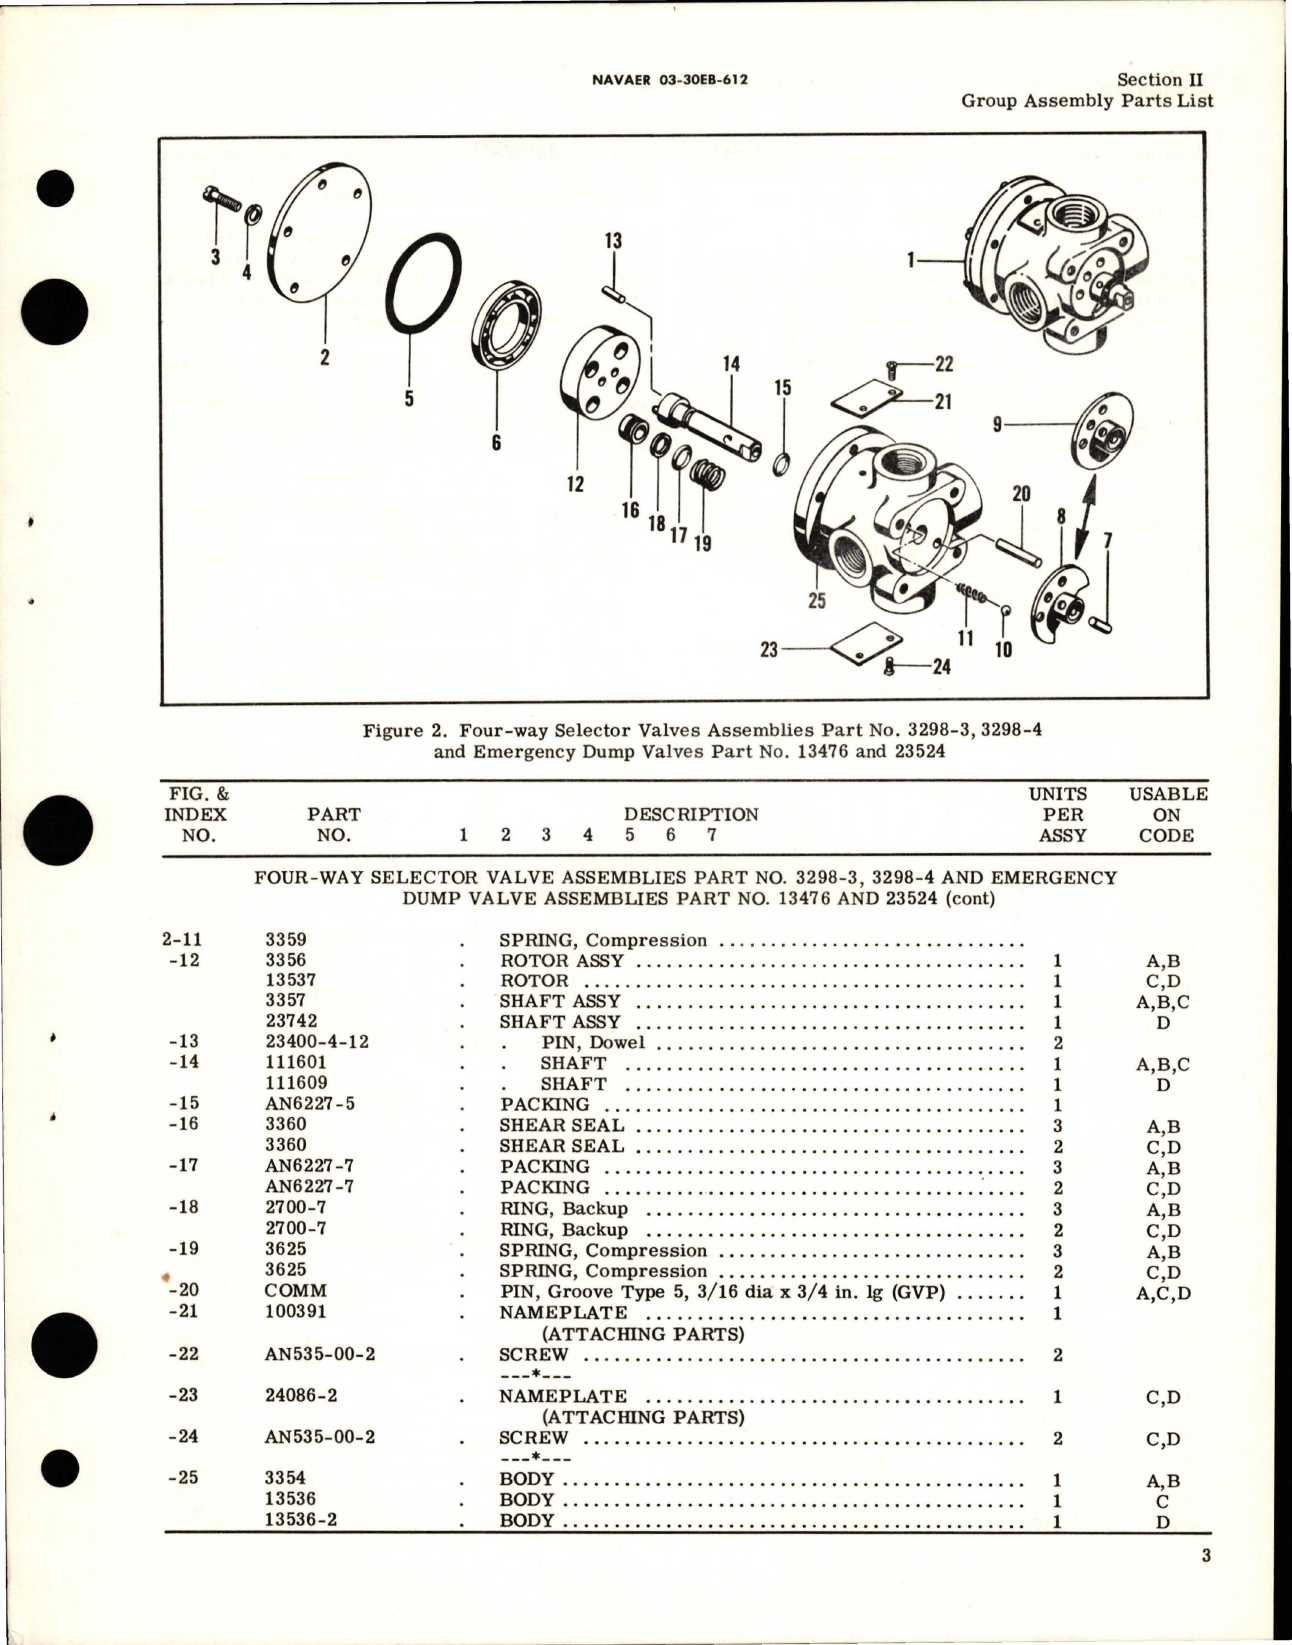 Sample page 5 from AirCorps Library document: Illustrated Parts Breakdown for Rotary Selector Valves